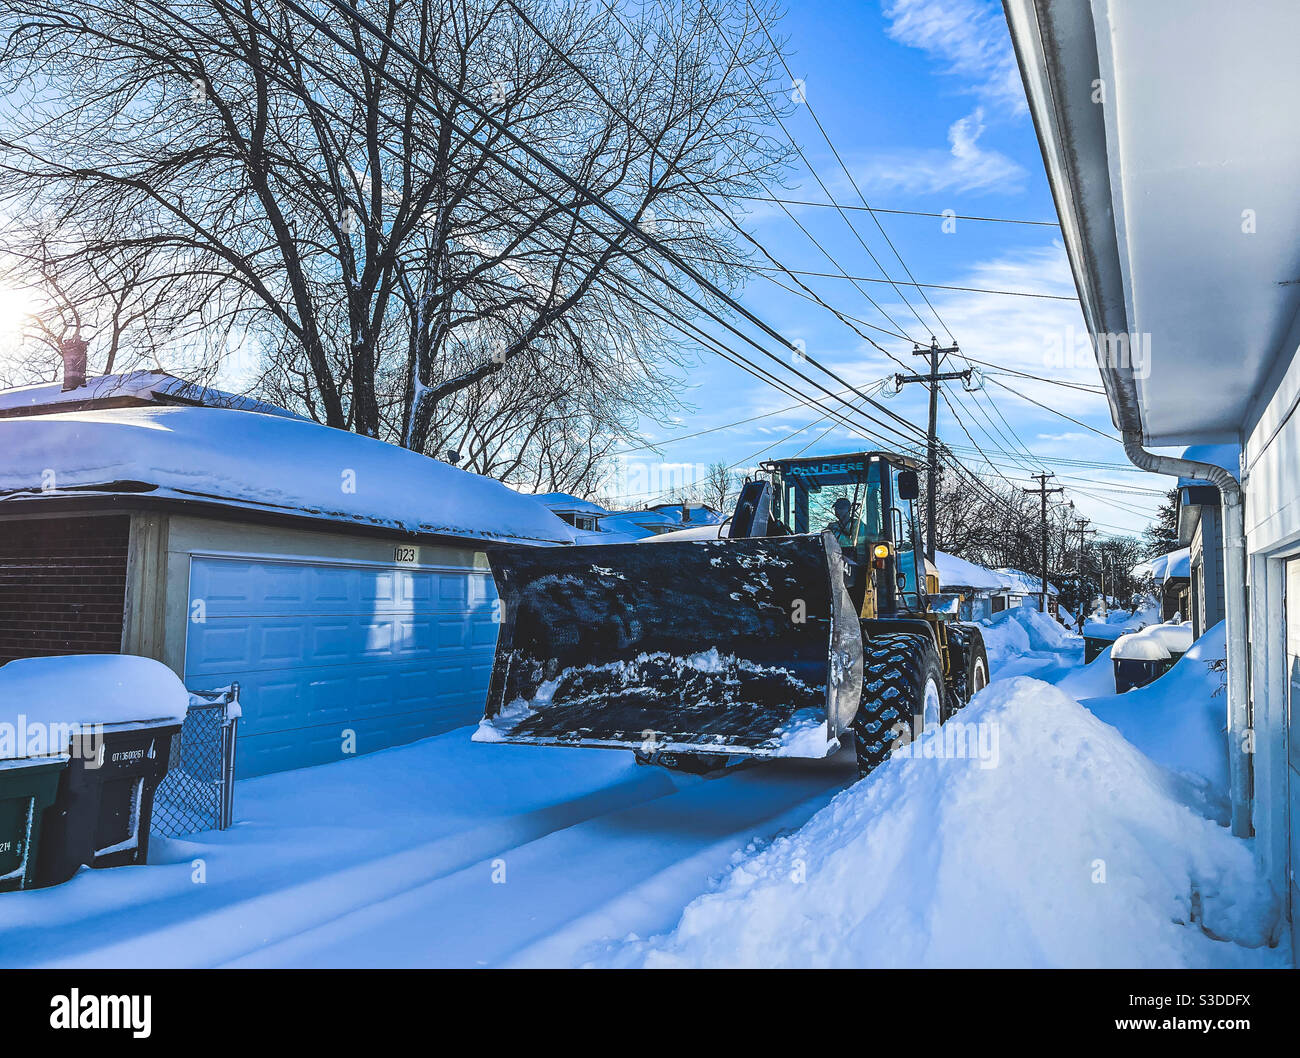 Oak Park, Illinois, USA. 16th February 2021. A front end loader passes through an alley after almost 24 hours of heavy snow in this western suburb of Chicago. Snowfall totaled over 12 inches/25cm. Stock Photo